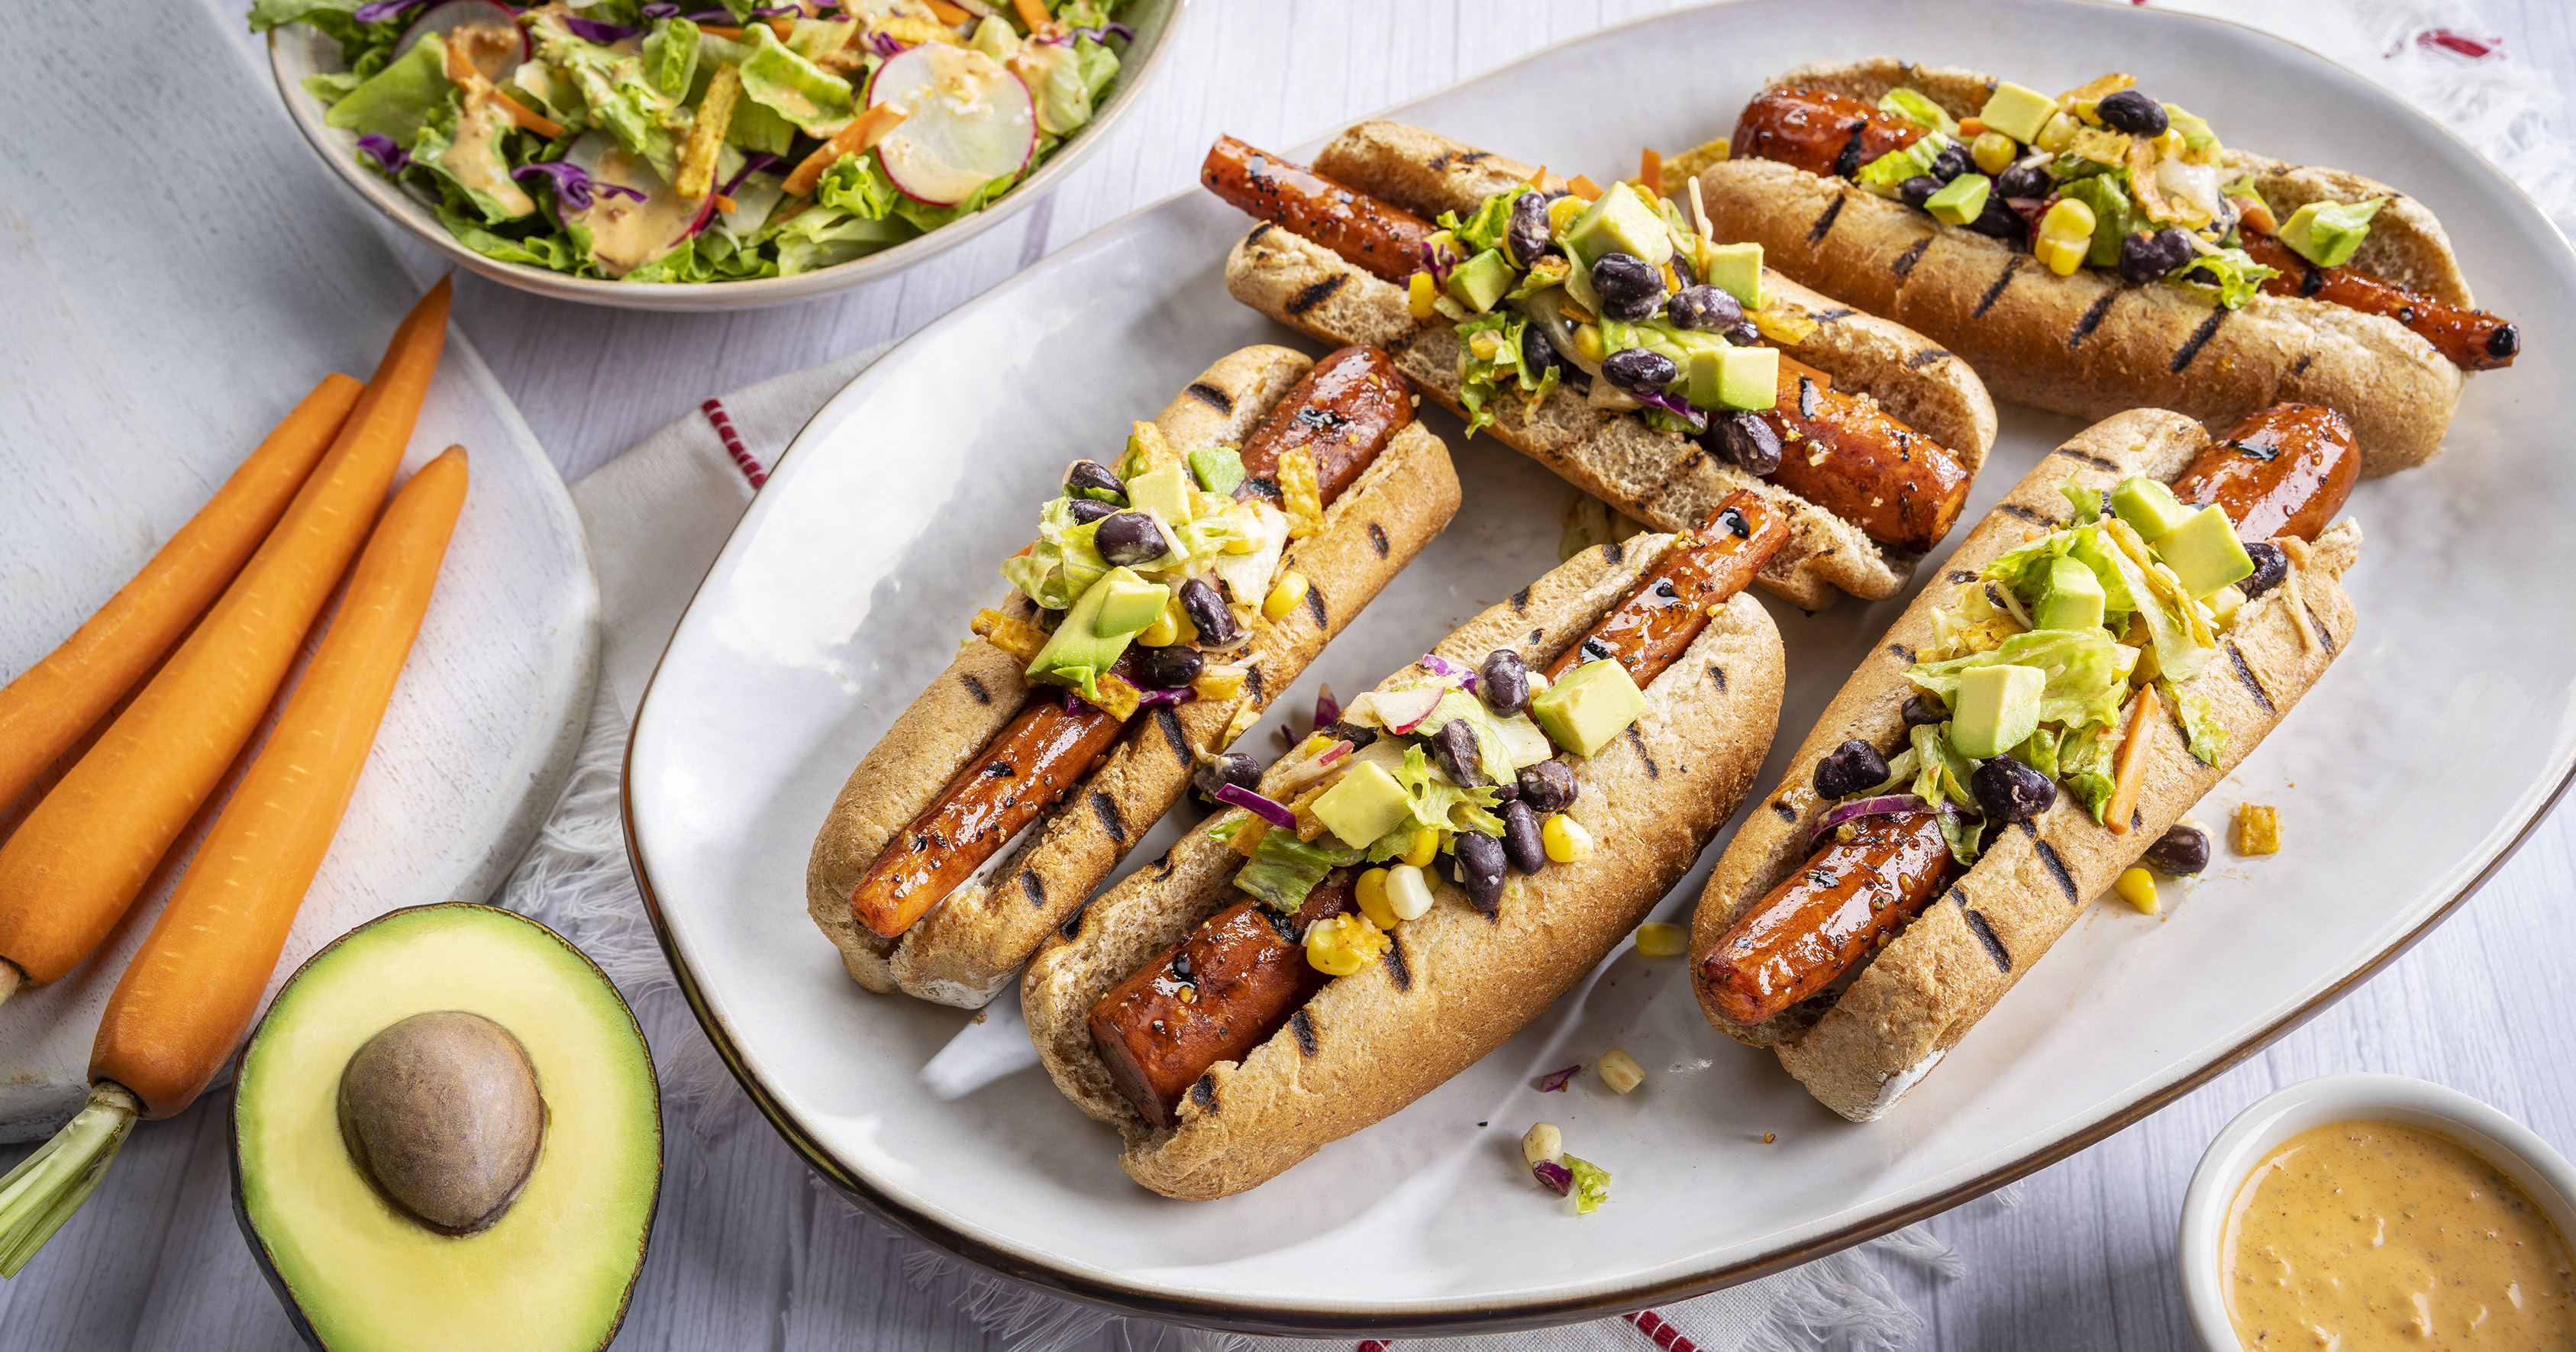 Southwest Carrot Dogs